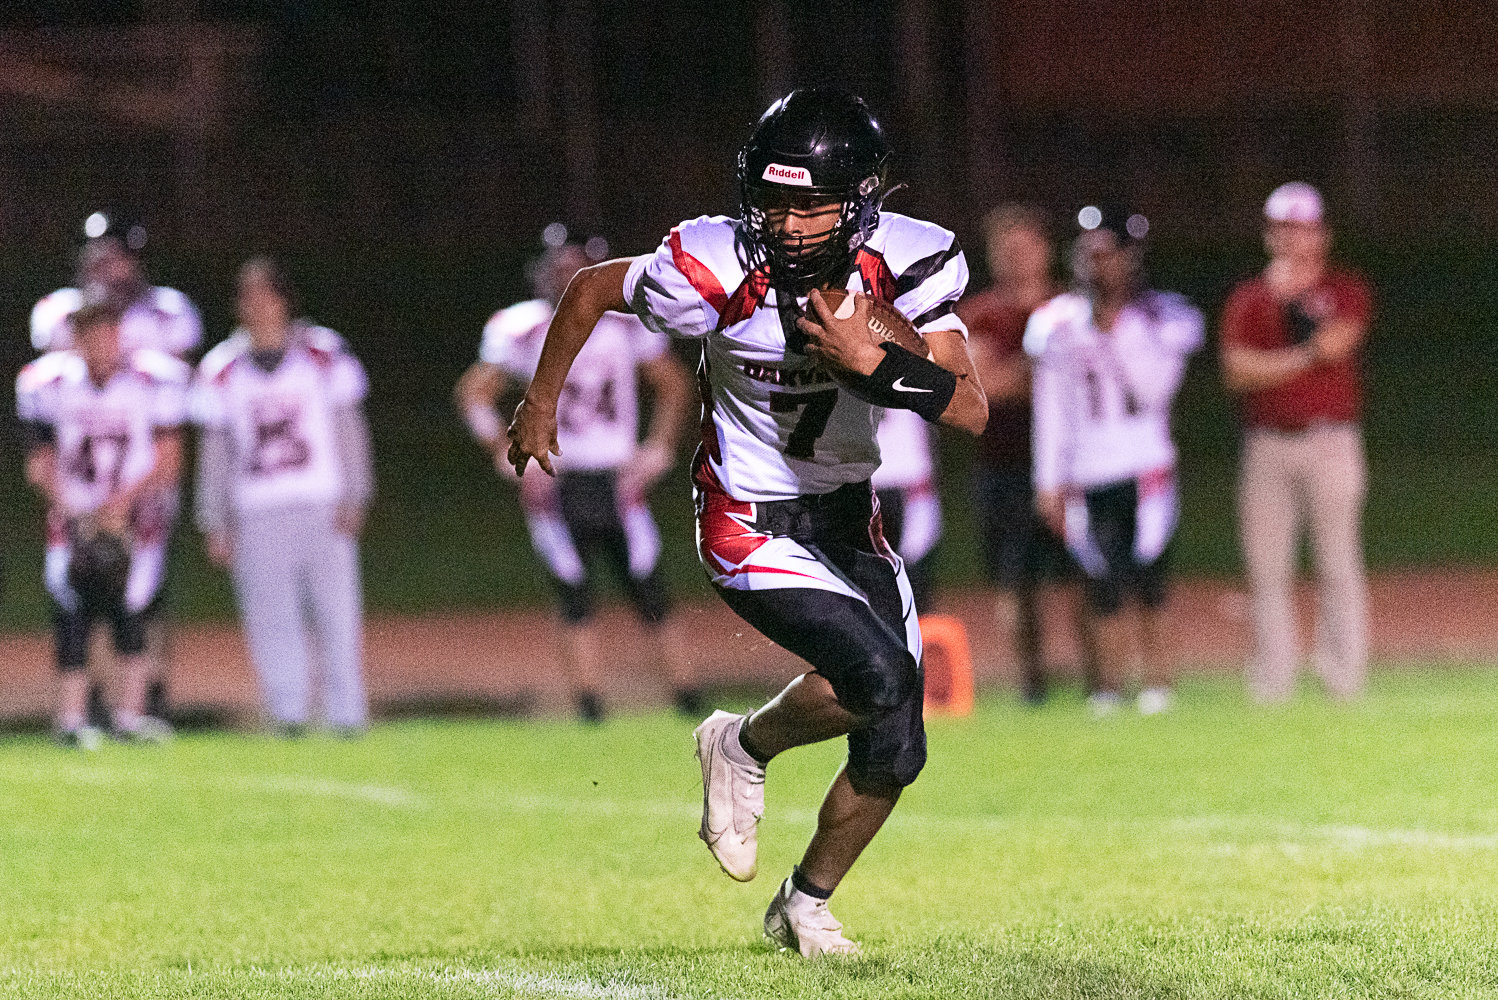 Eddie Klatush carries the ball for Oakville during the Acorns' 36-28 loss to Winlock on Oct. 7.